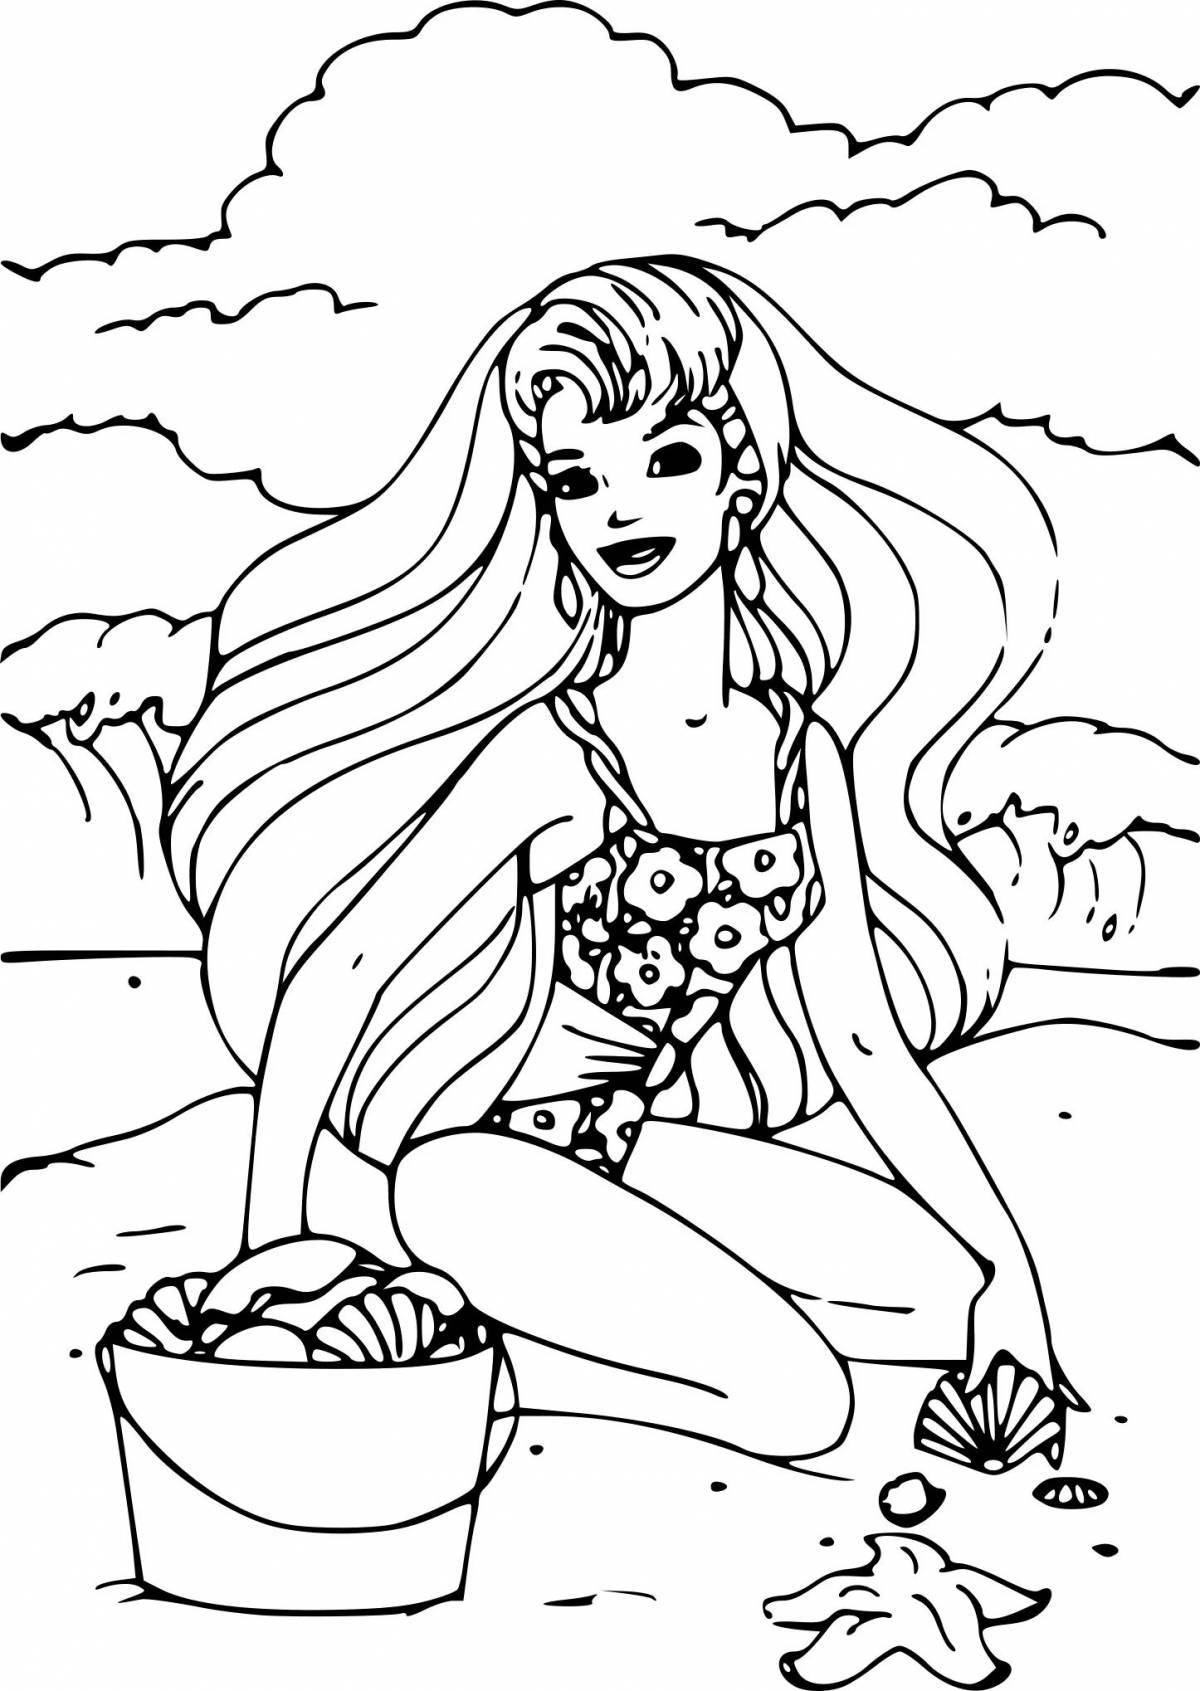 Glowing barbie in the sea coloring page